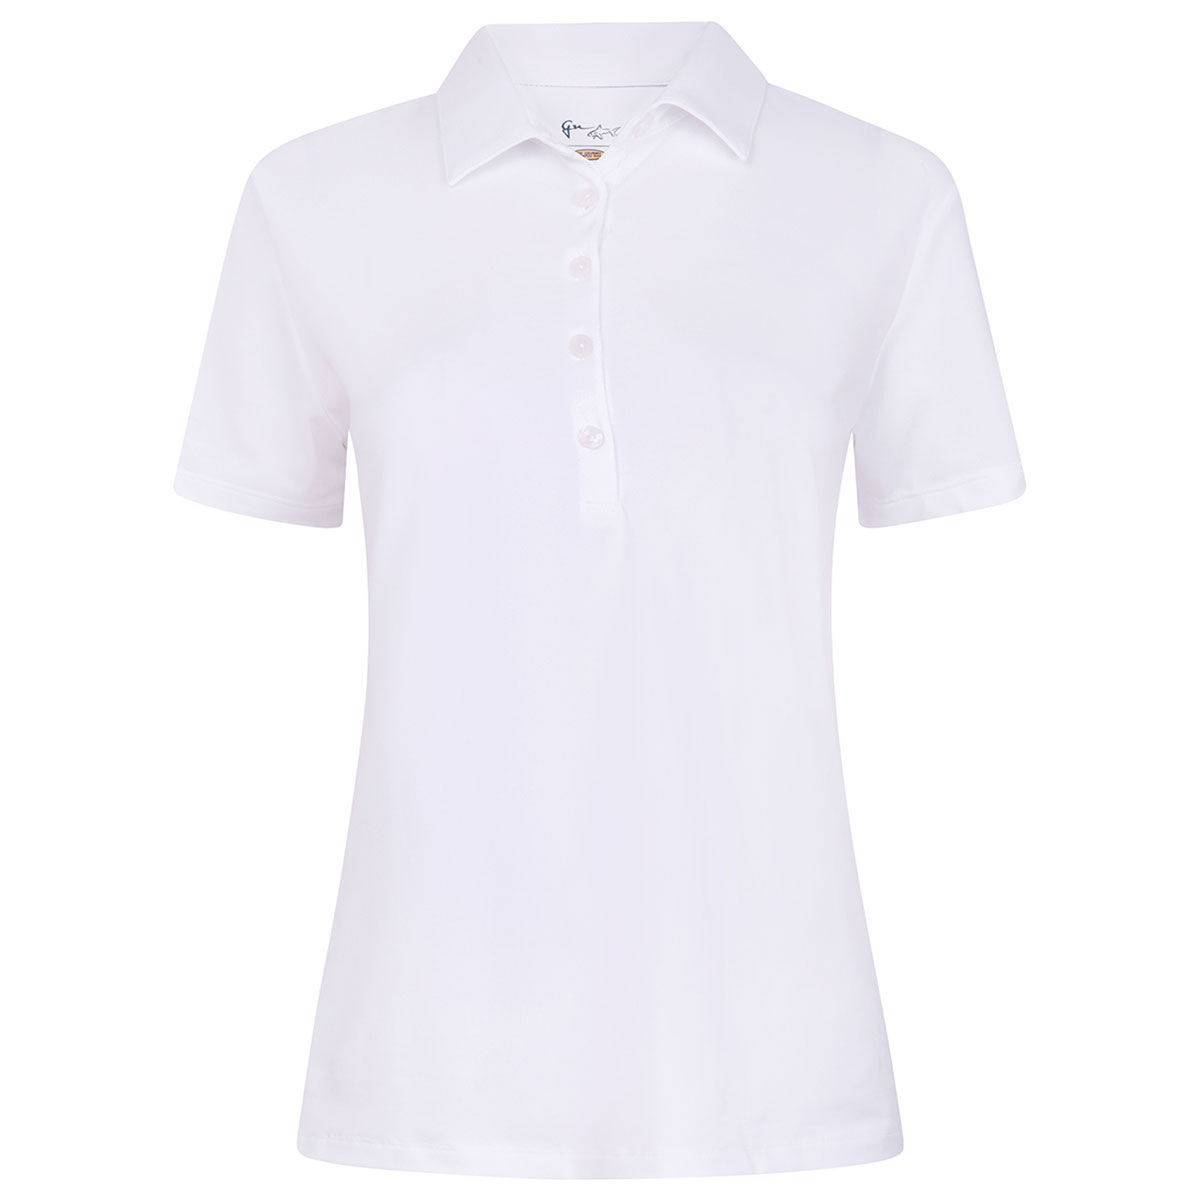 Greg Norman White Embroidered Freedom Pique Golf Polo Shirt, Womens | American Golf, Size: Large von Greg Norman